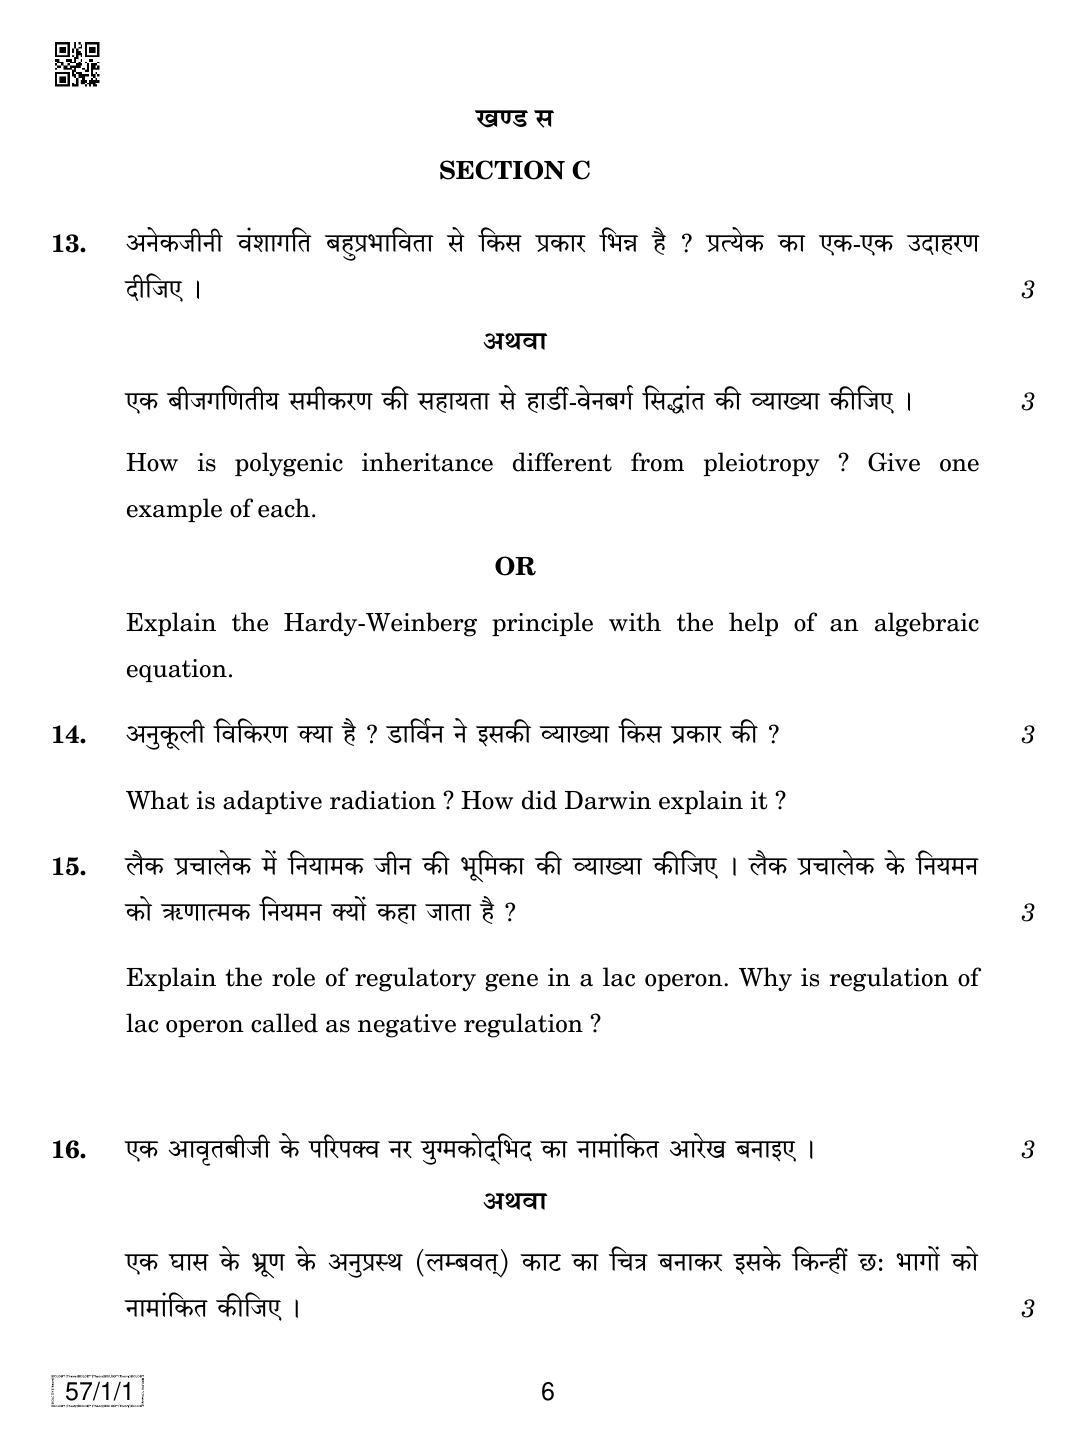 CBSE Class 12 57-1-1 BIOLOGY 2019 Compartment Question Paper - Page 6